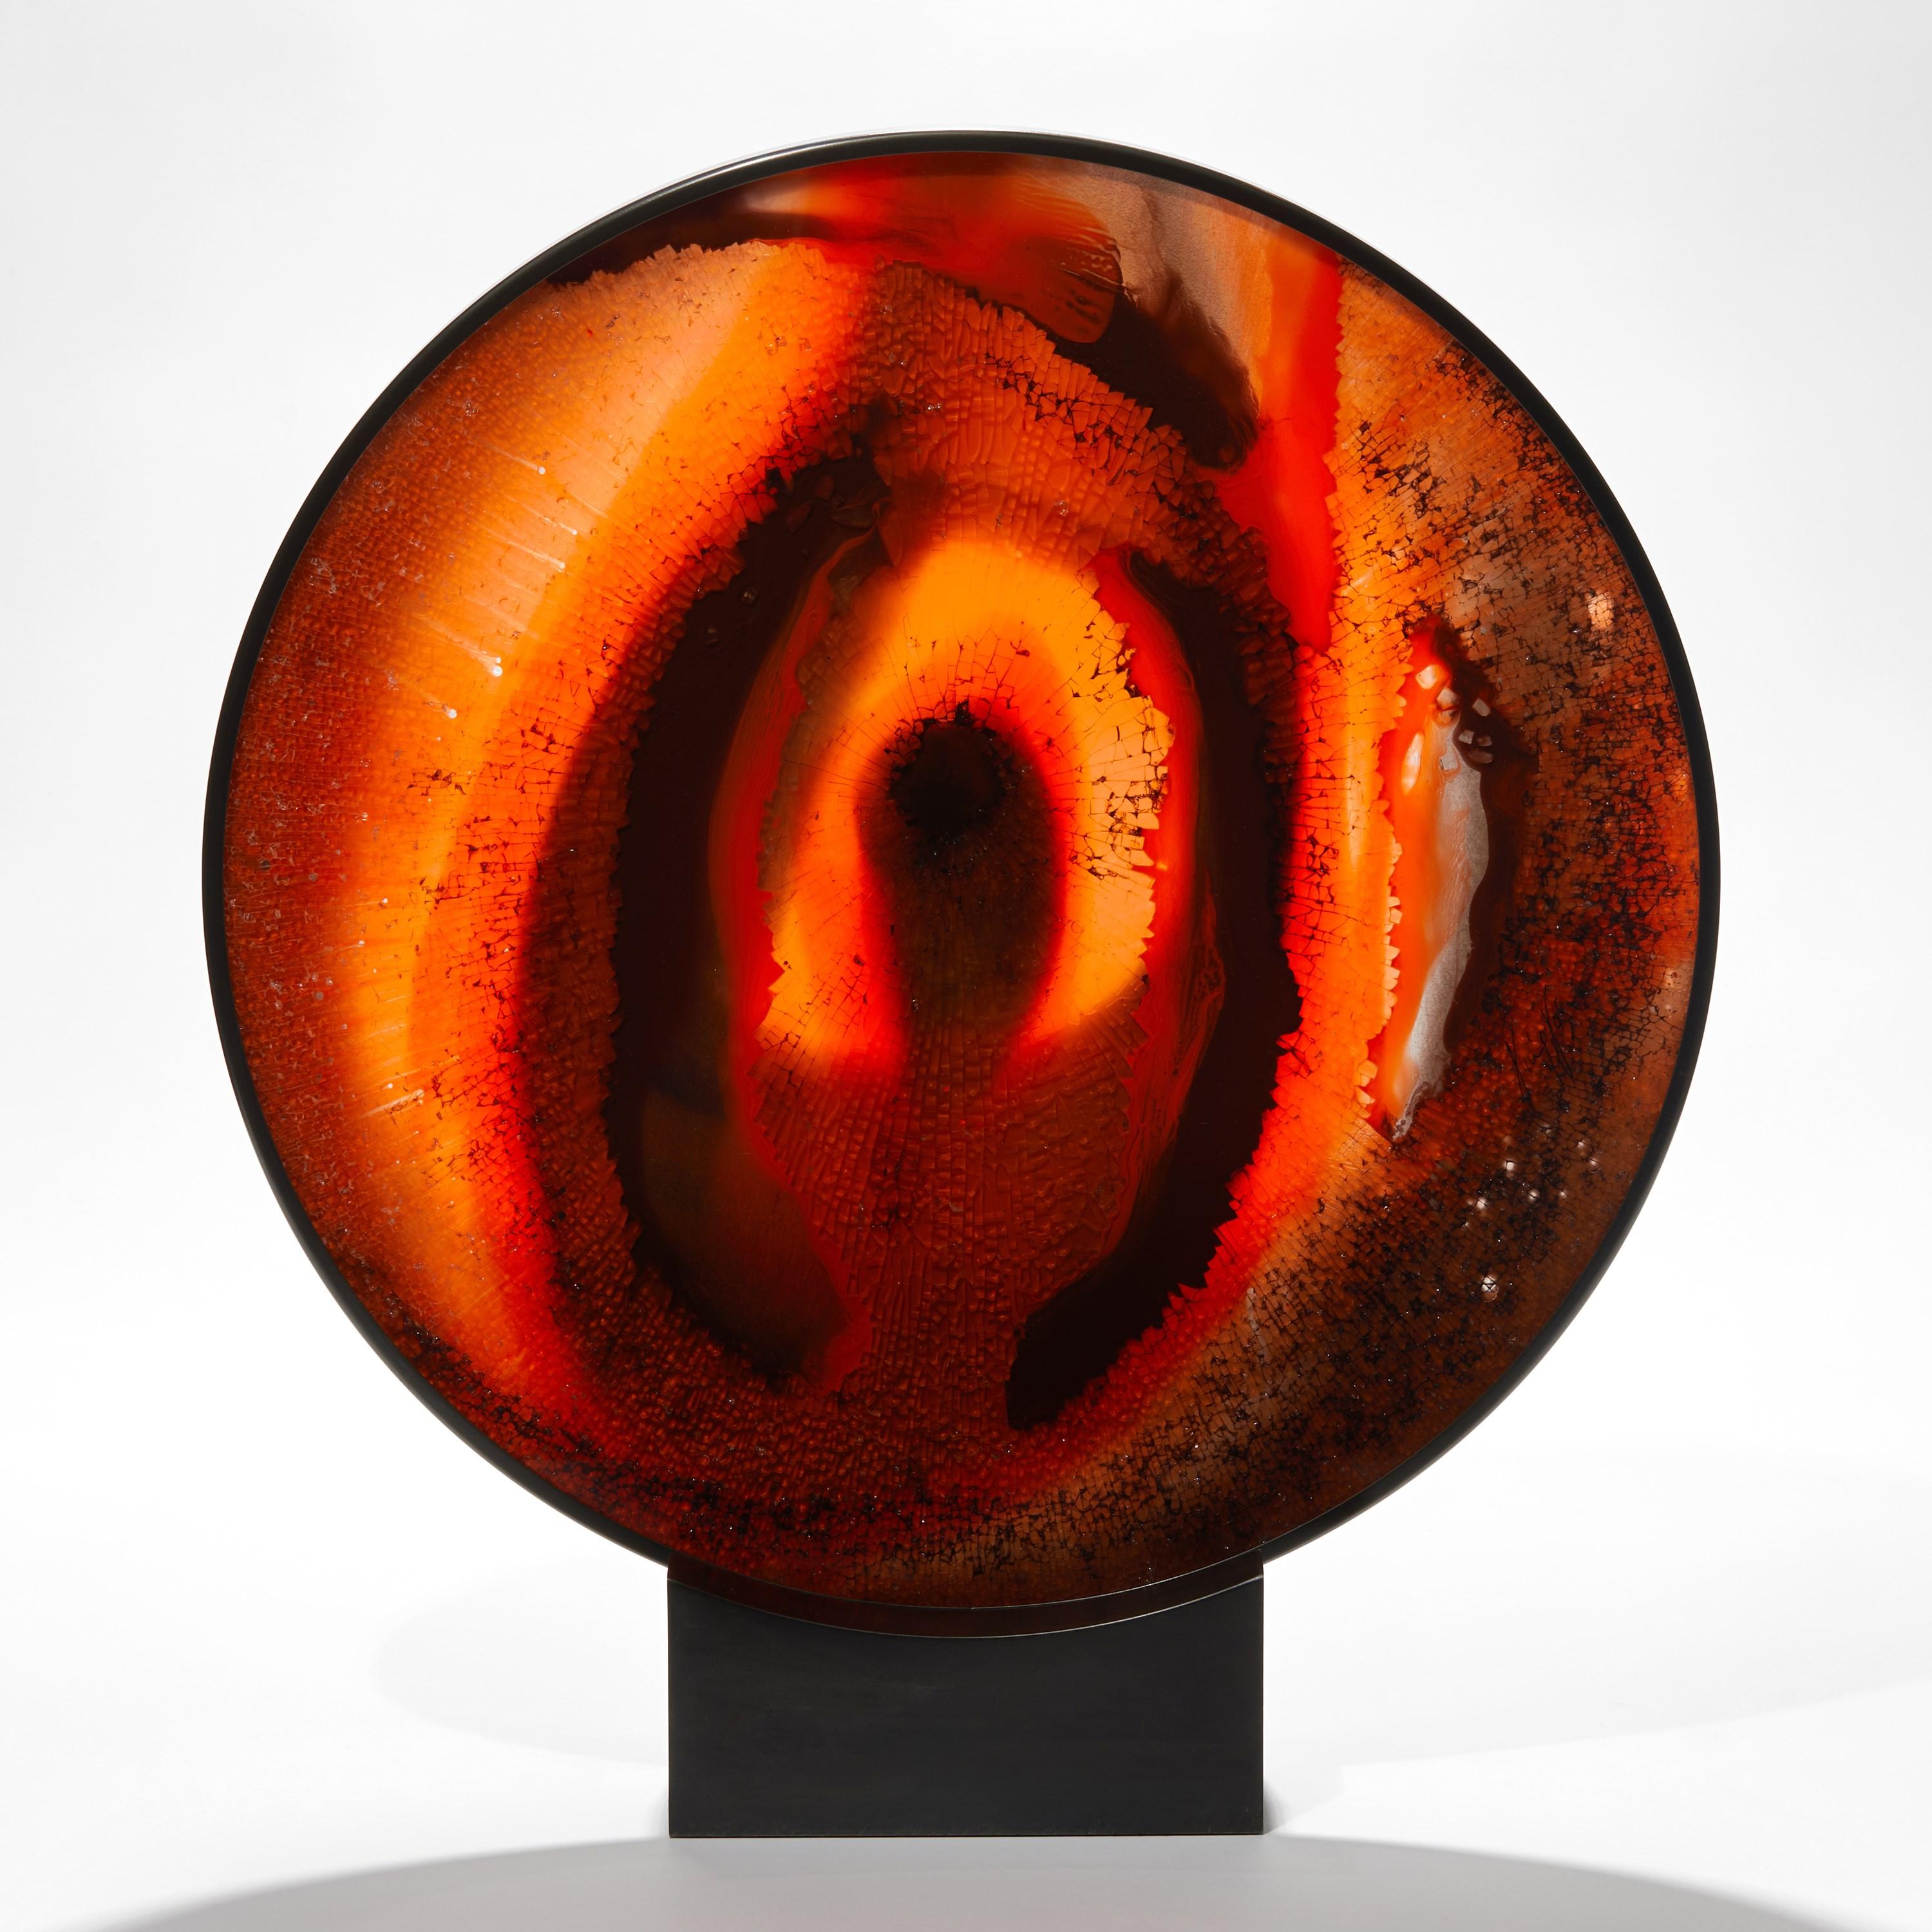 ‘Eye of Bravery’ is a unique sculpture by the Cypriot artist, Yorgos Papadopoulos, created from glass, silicone and fluorescent pigments with a hematite patinated steel bezel and stand.

Papadopoulos has reworked the iconic 'Evil Eye' amulet with